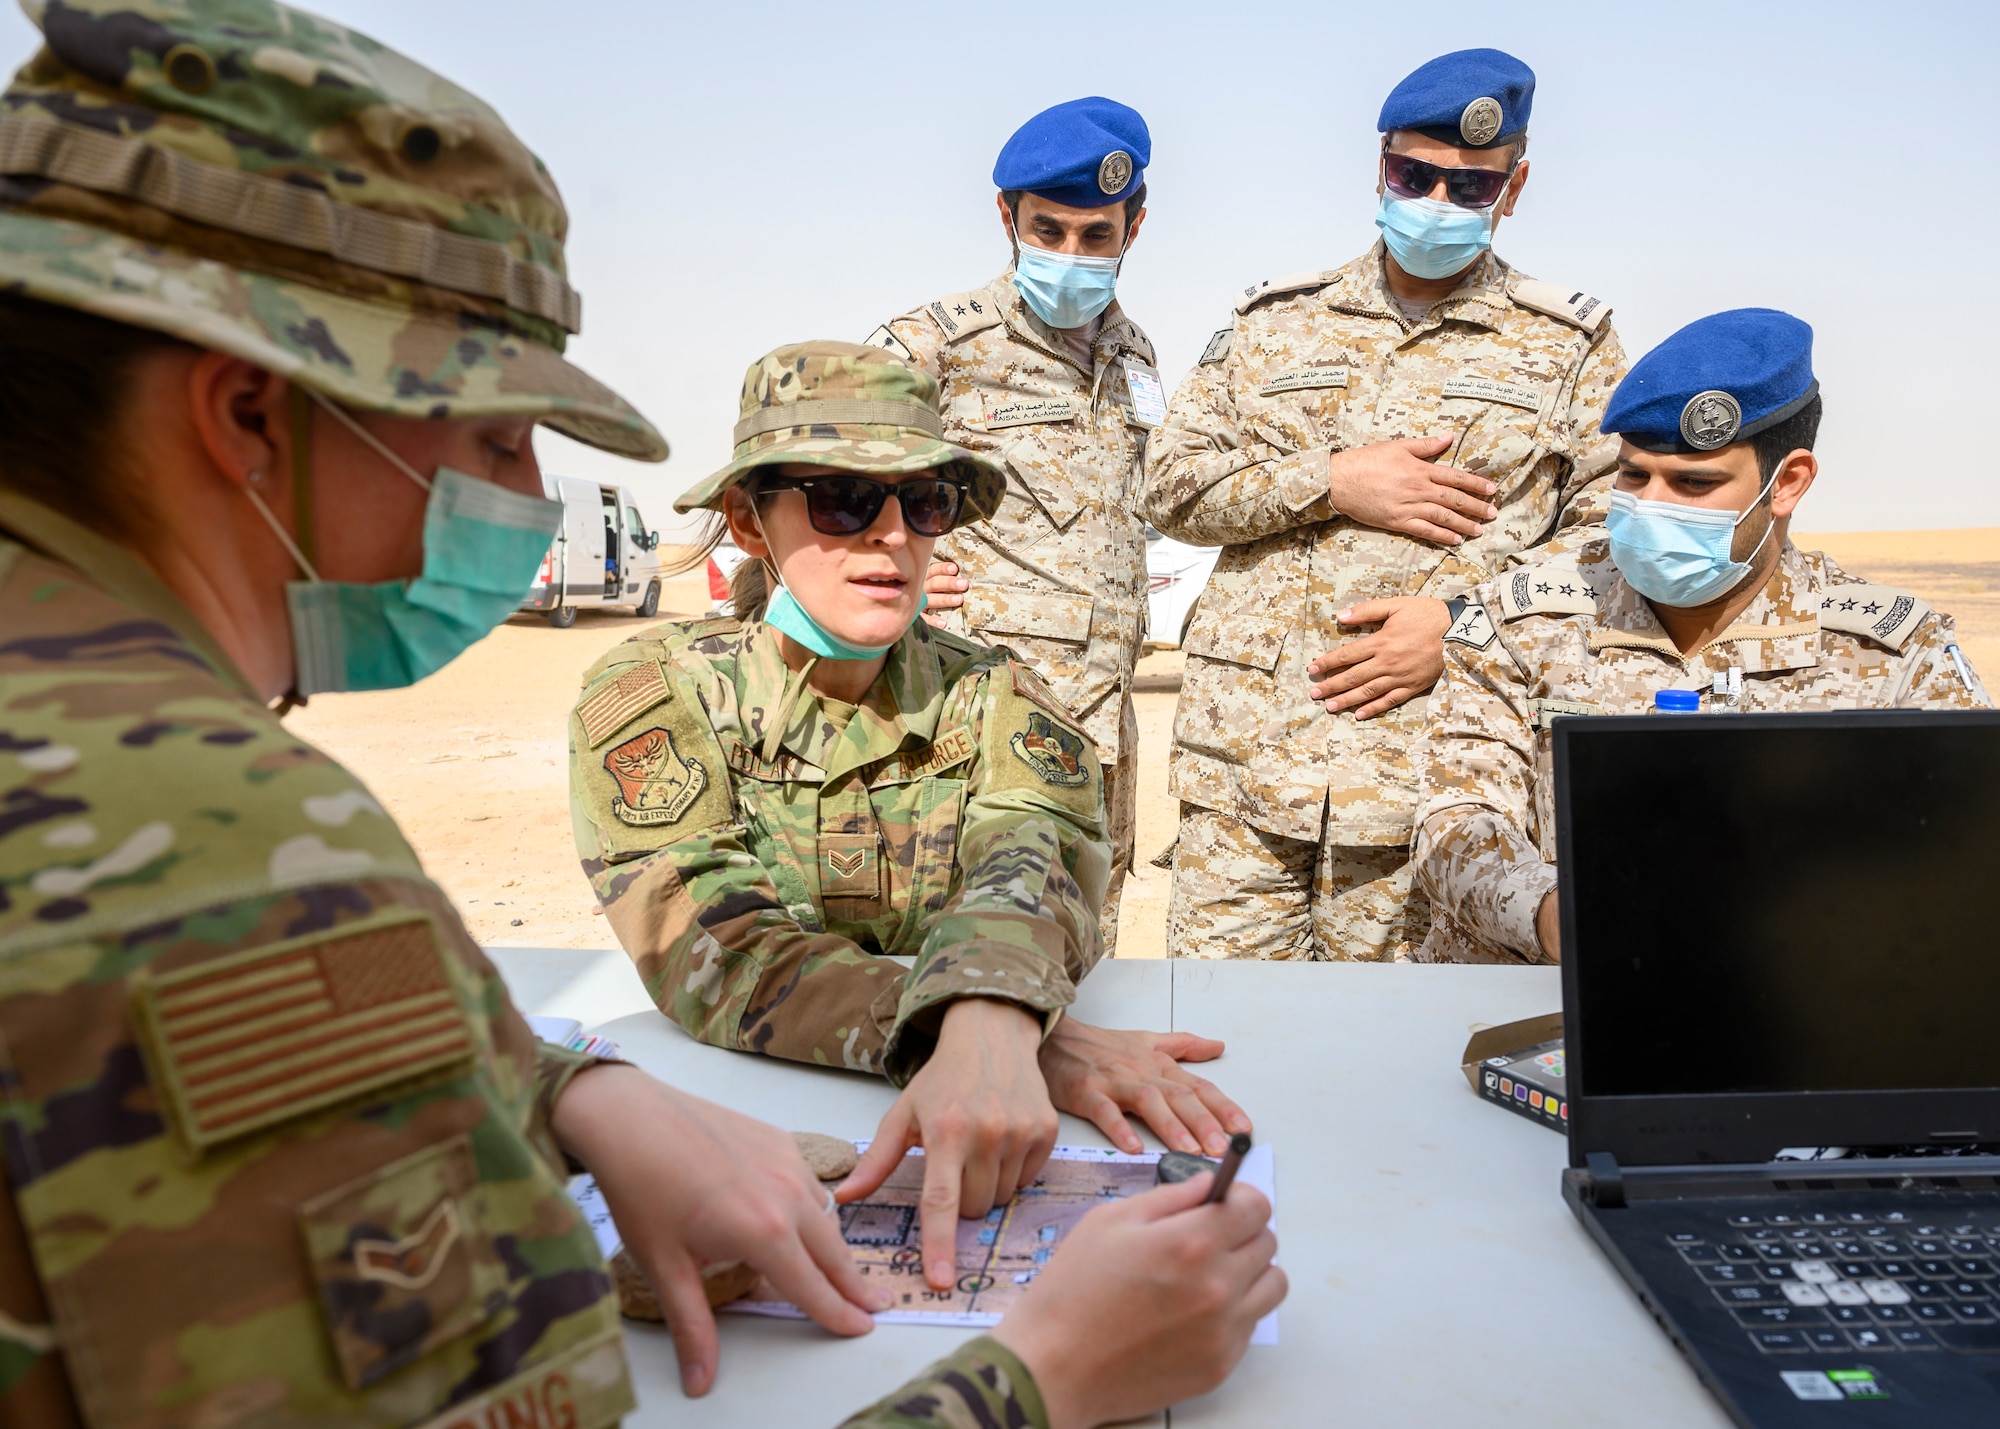 Senior Airman Magdalena Polak, 378th Air Expeditionary Wing Host Nation Coordination Cell translator, relays the planned actions for a chemical, biological, radiological and nuclear response exercise to members of the Royal Saudi Air Force, Prince Sultan Air Base, Kingdom of Saudi Arabia, May 26, 2021. The combined exercise demonstrates the emergency management integration between USAF and RSAF CBRN response units while also familiarizing each unit with the other’s techniques and procedures. (U.S. Air Force photo by Senior Airman Samuel Earick)